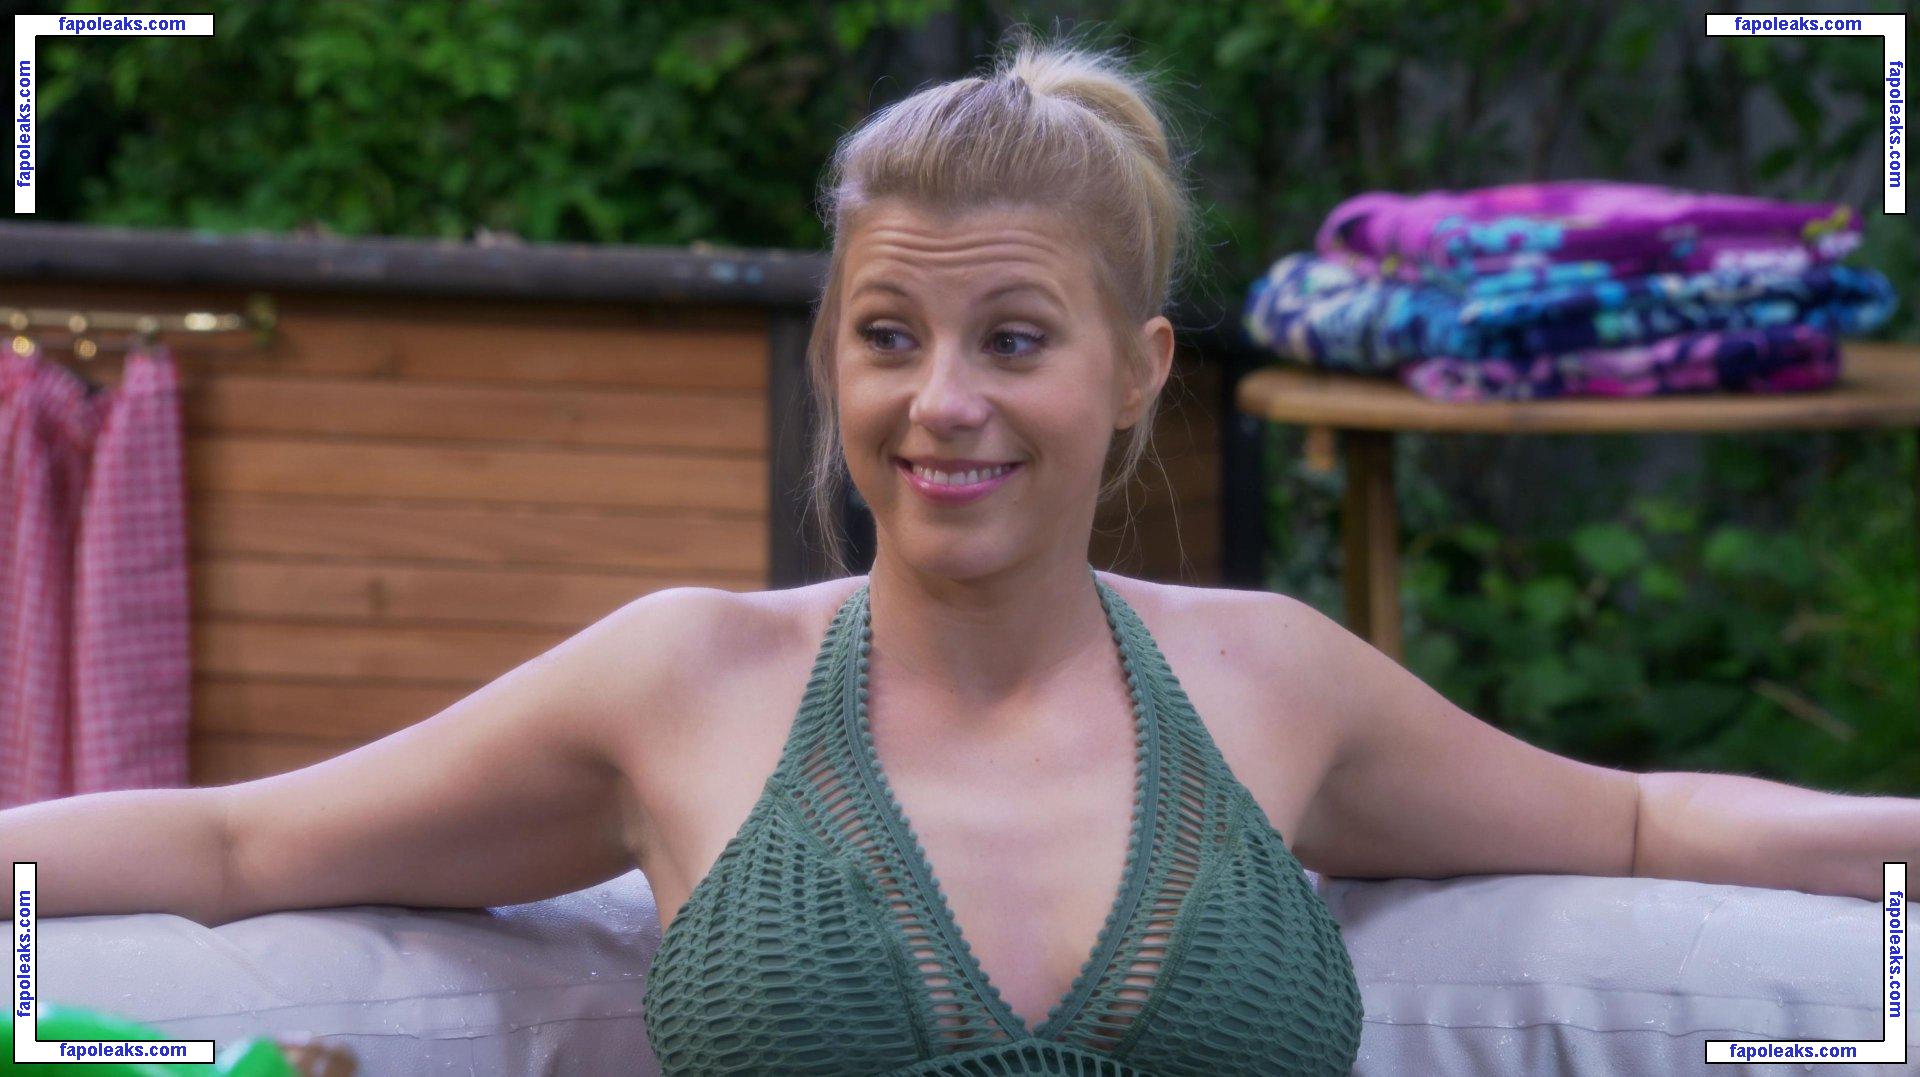 bob kittler recommends jodie sweetin nude pics pic